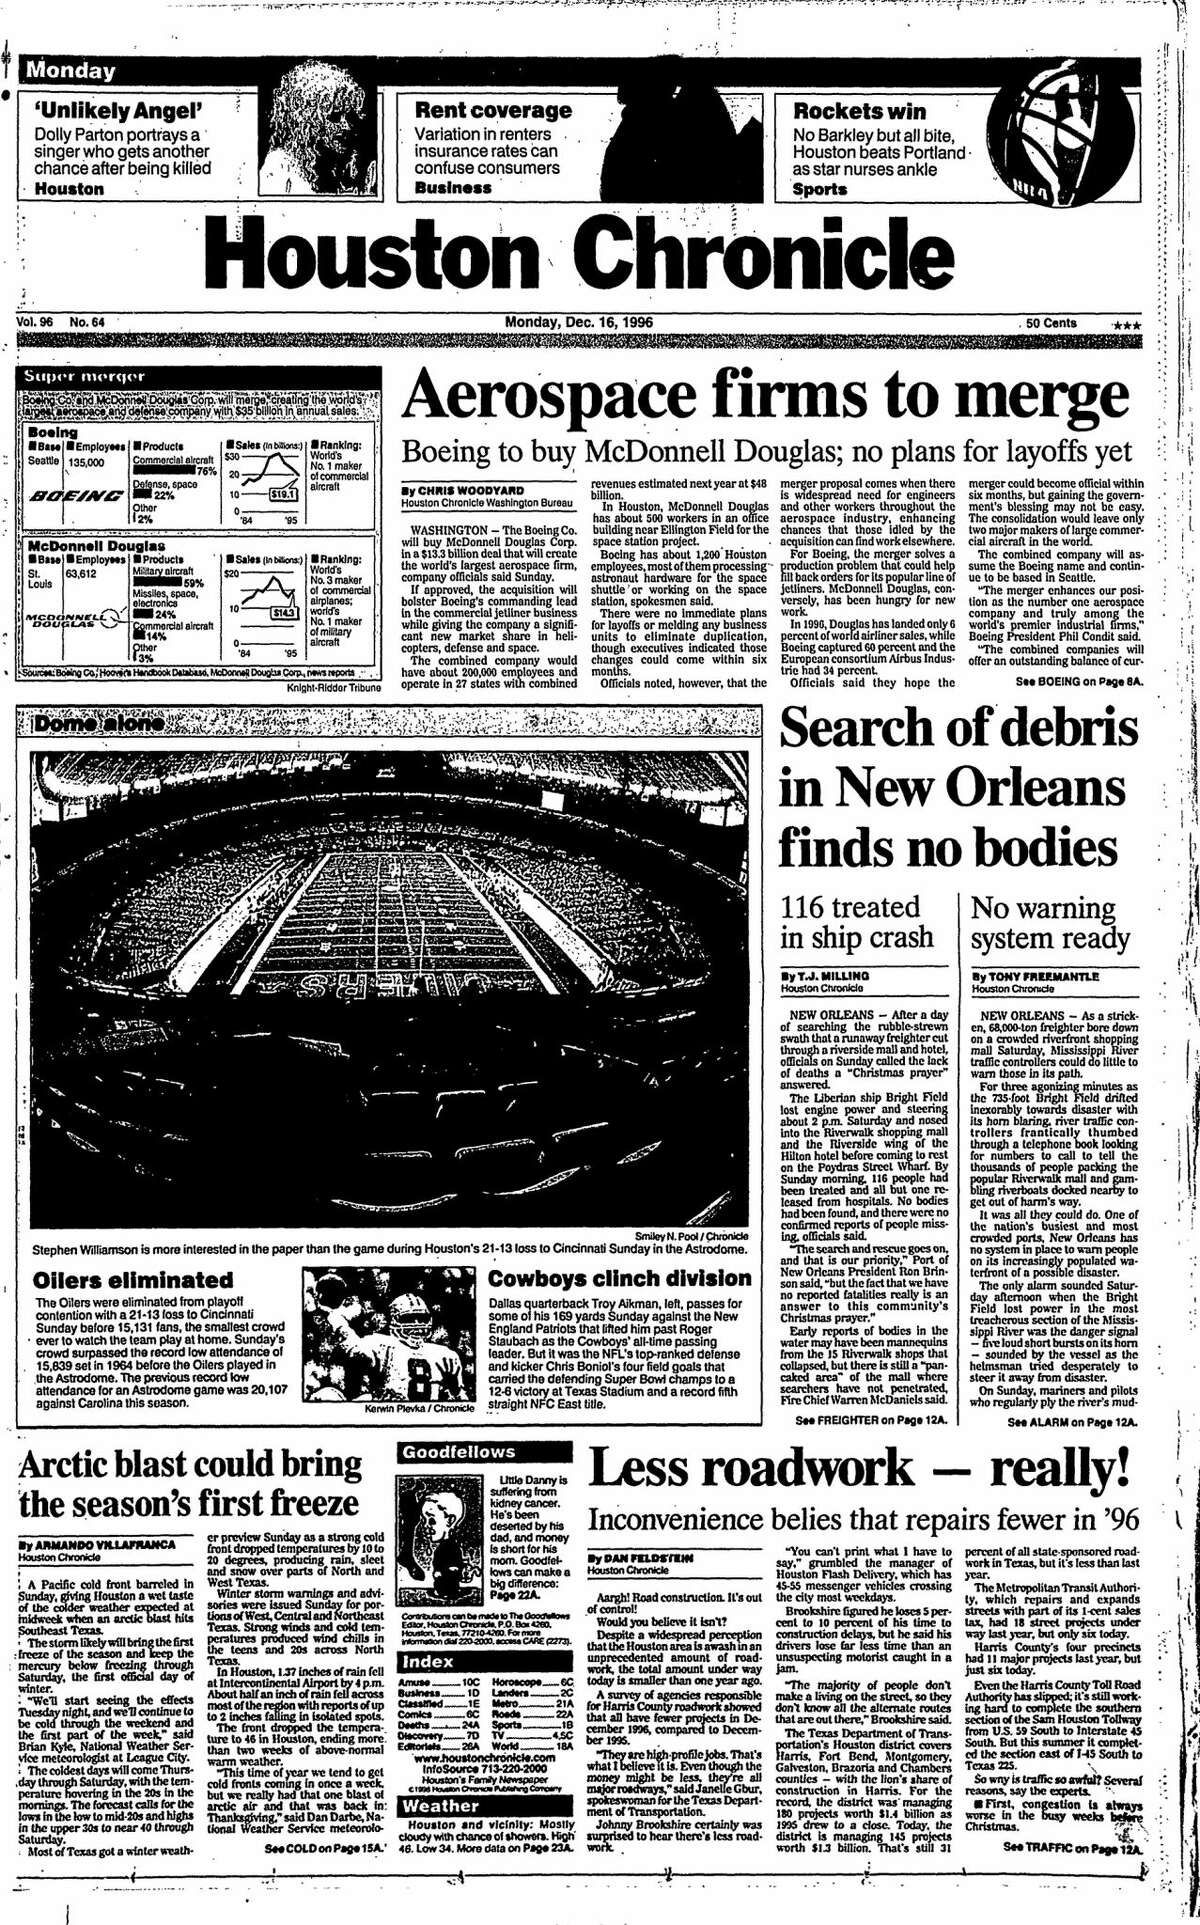 Houston Chronicle front page for Dec. 16, 1996.